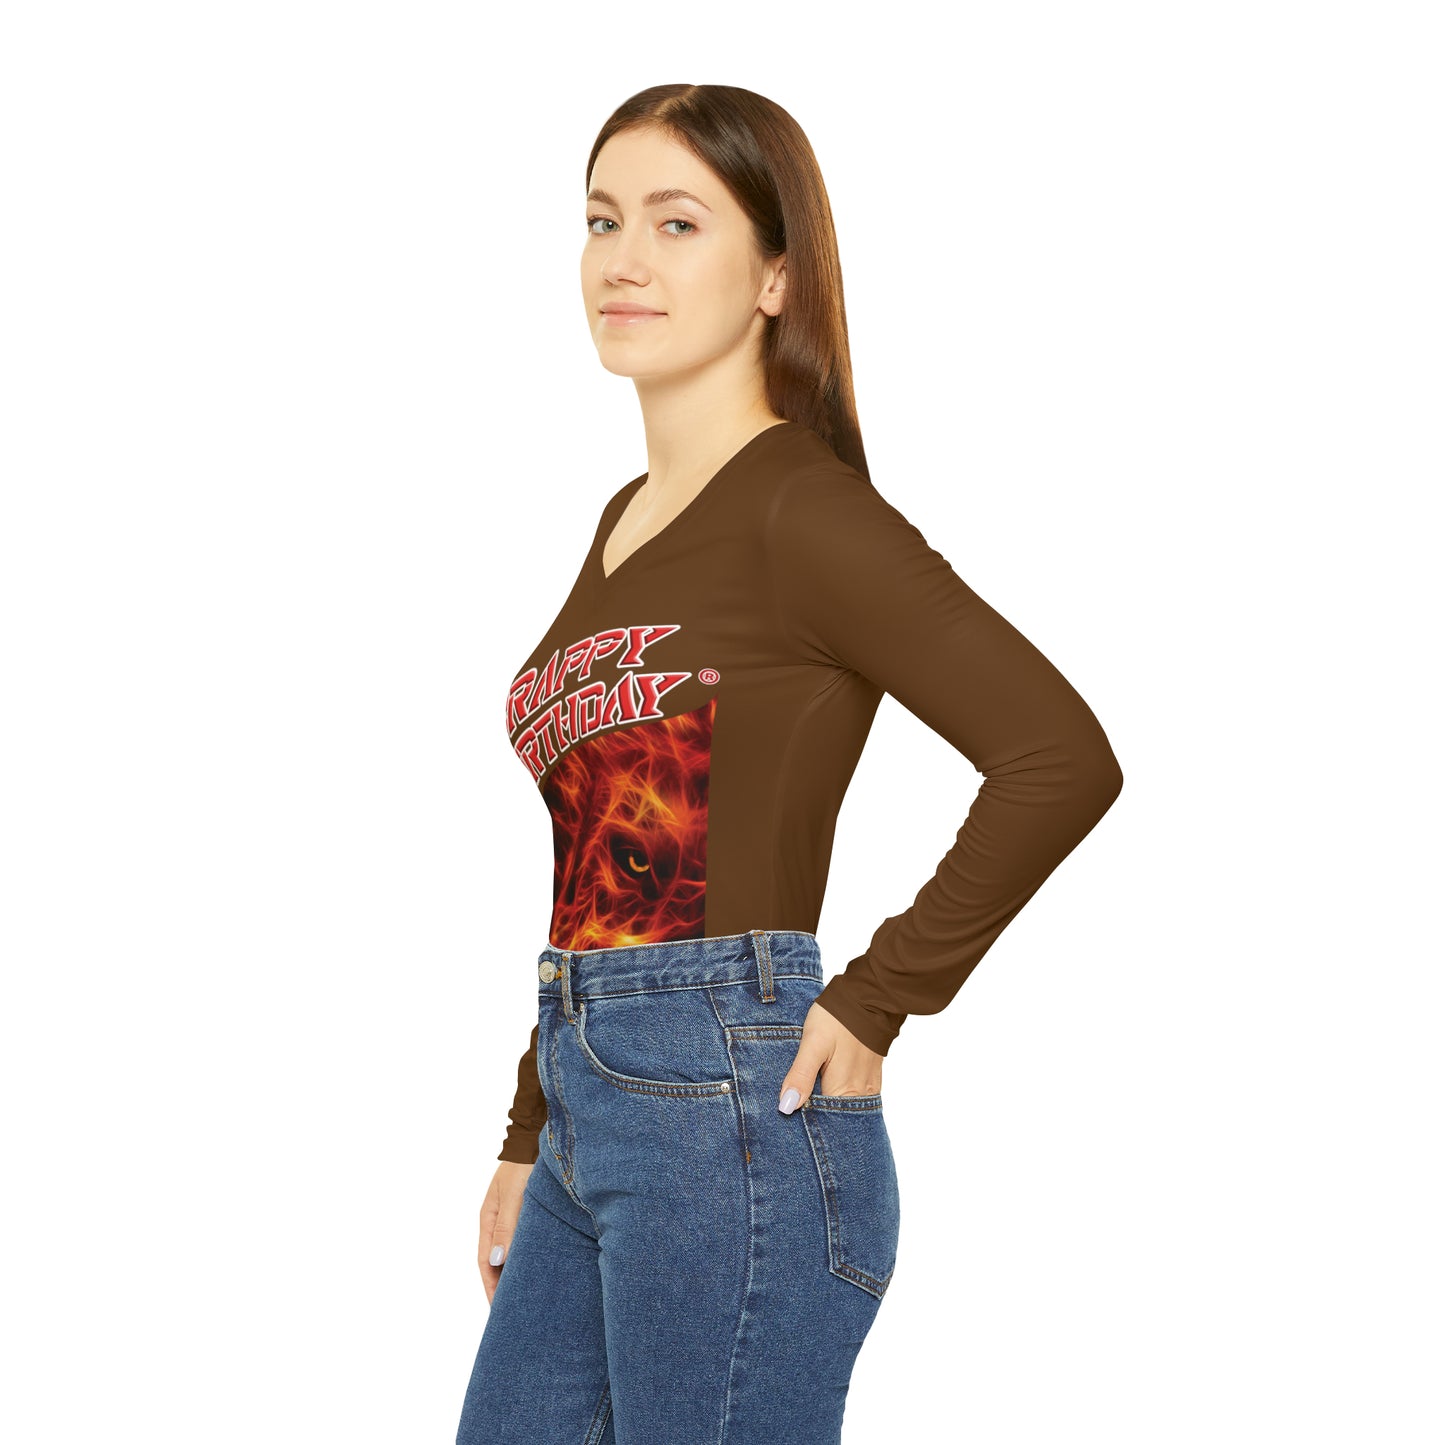 Crappy Birthday Chic Long Sleeve V-Neck Tee - Brown